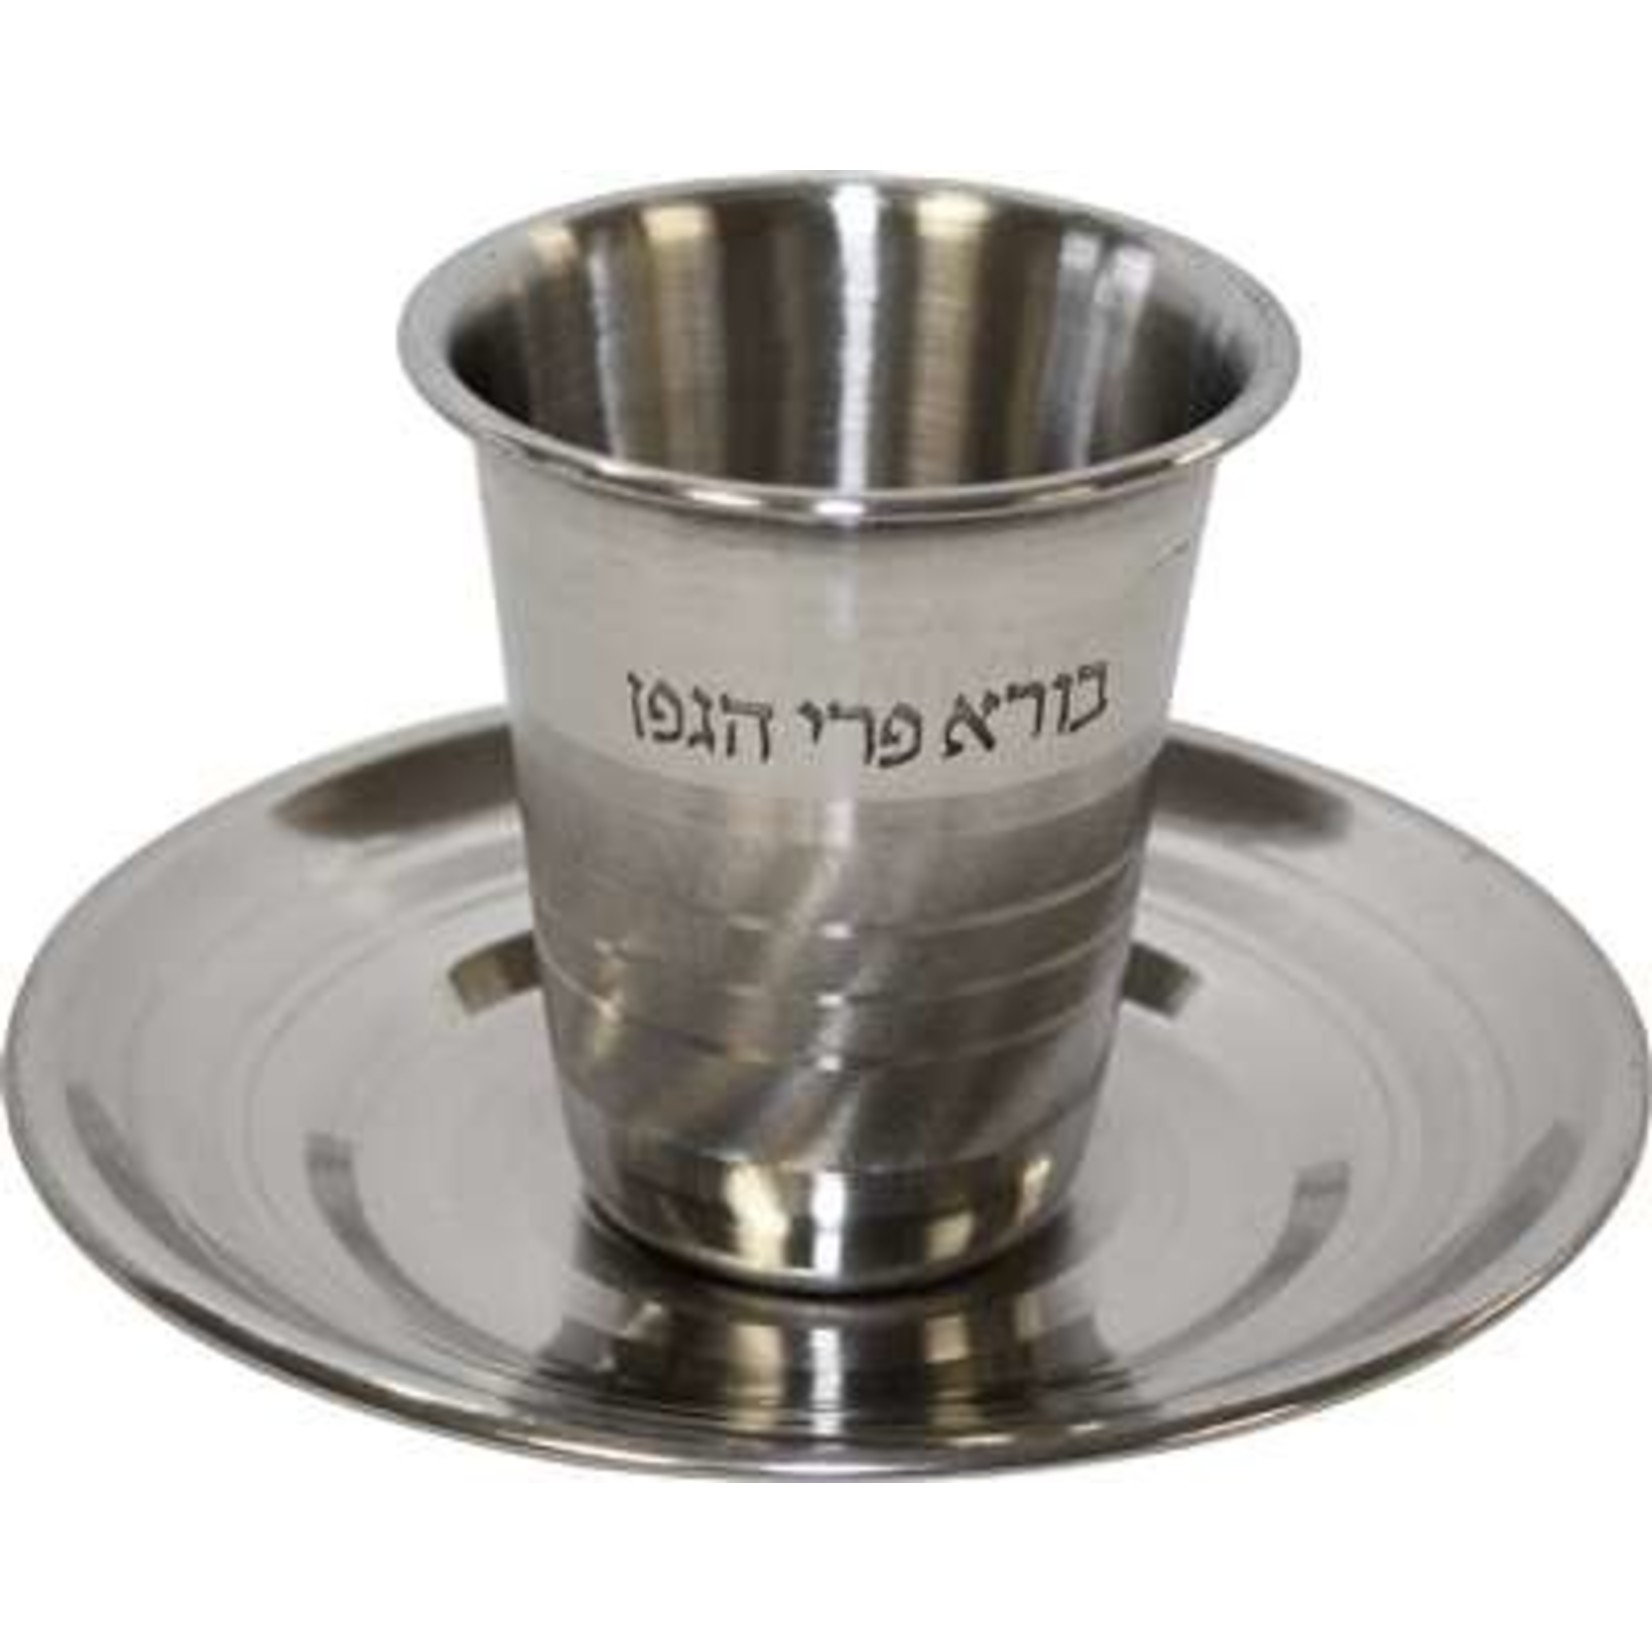 Stainless Steel Kiddush Cup Set